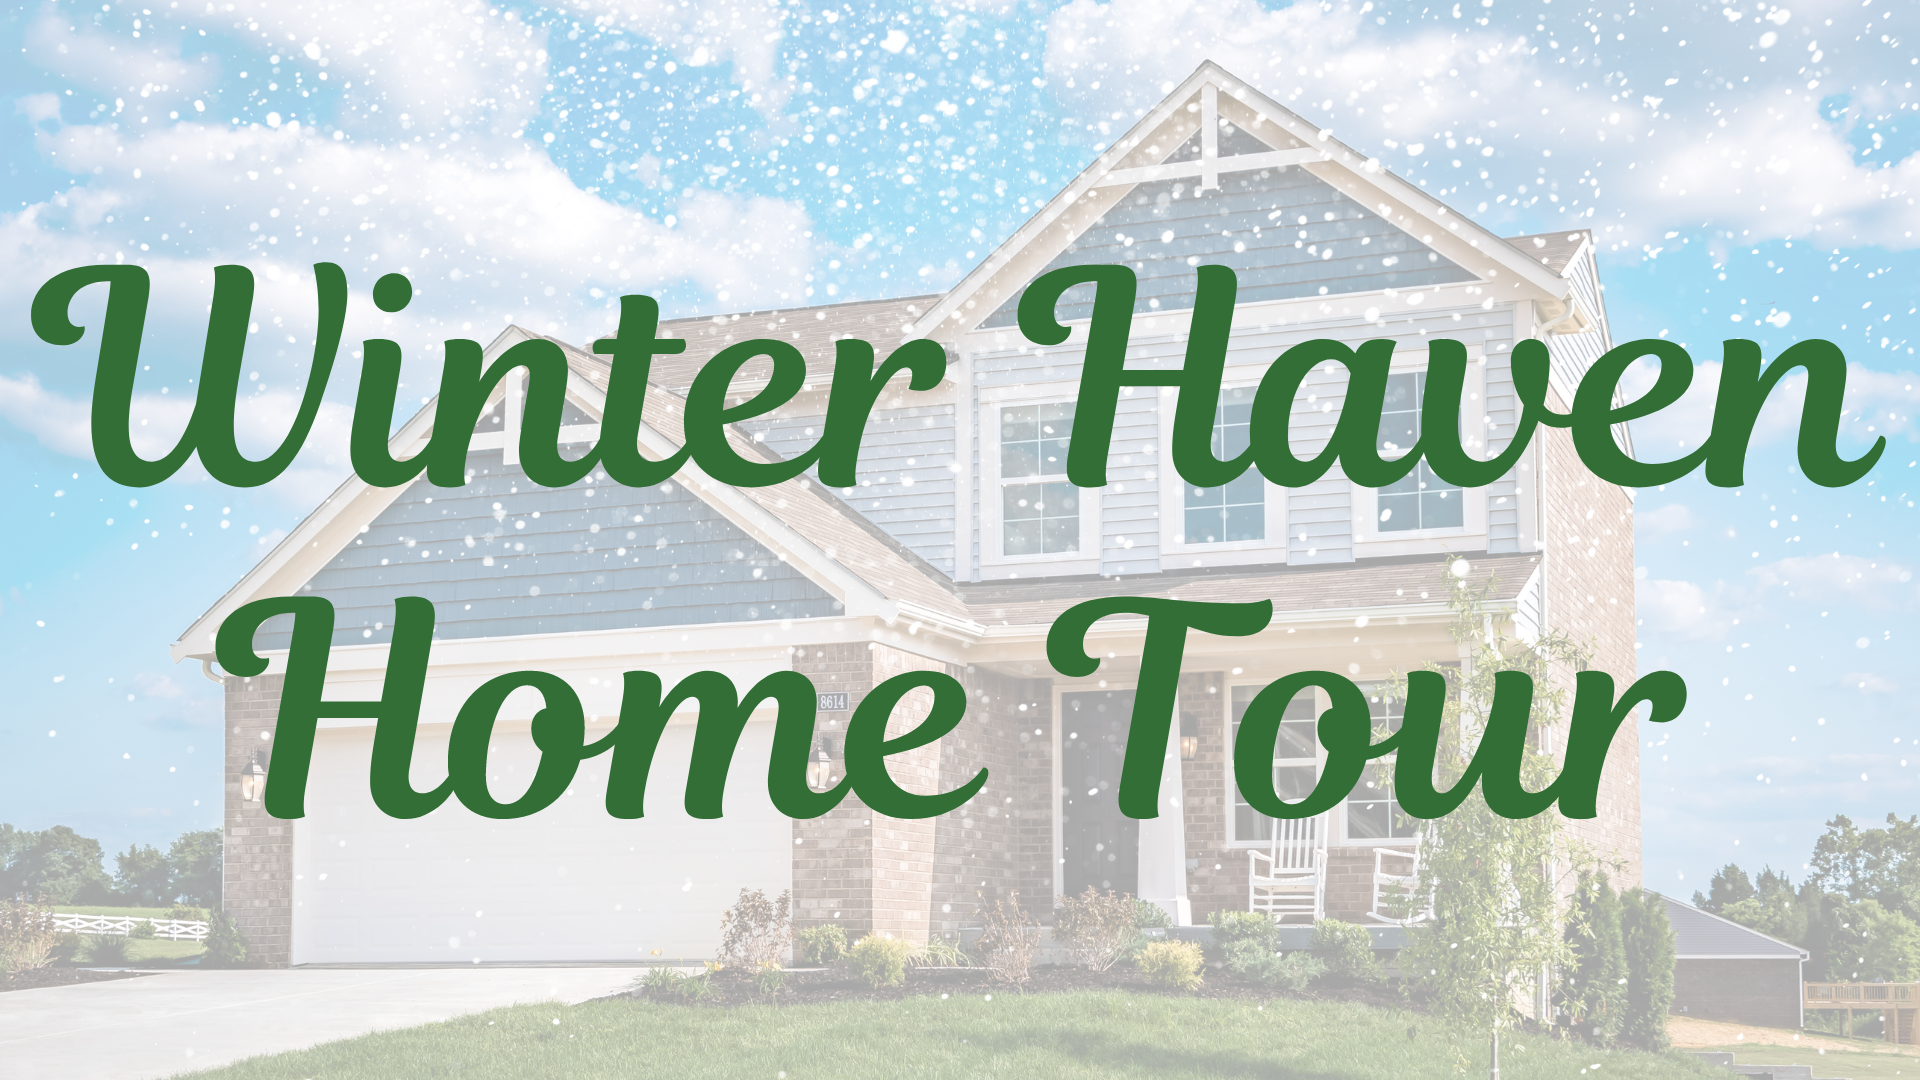 Winter Haven Home Tour in Shepherdsville, KY